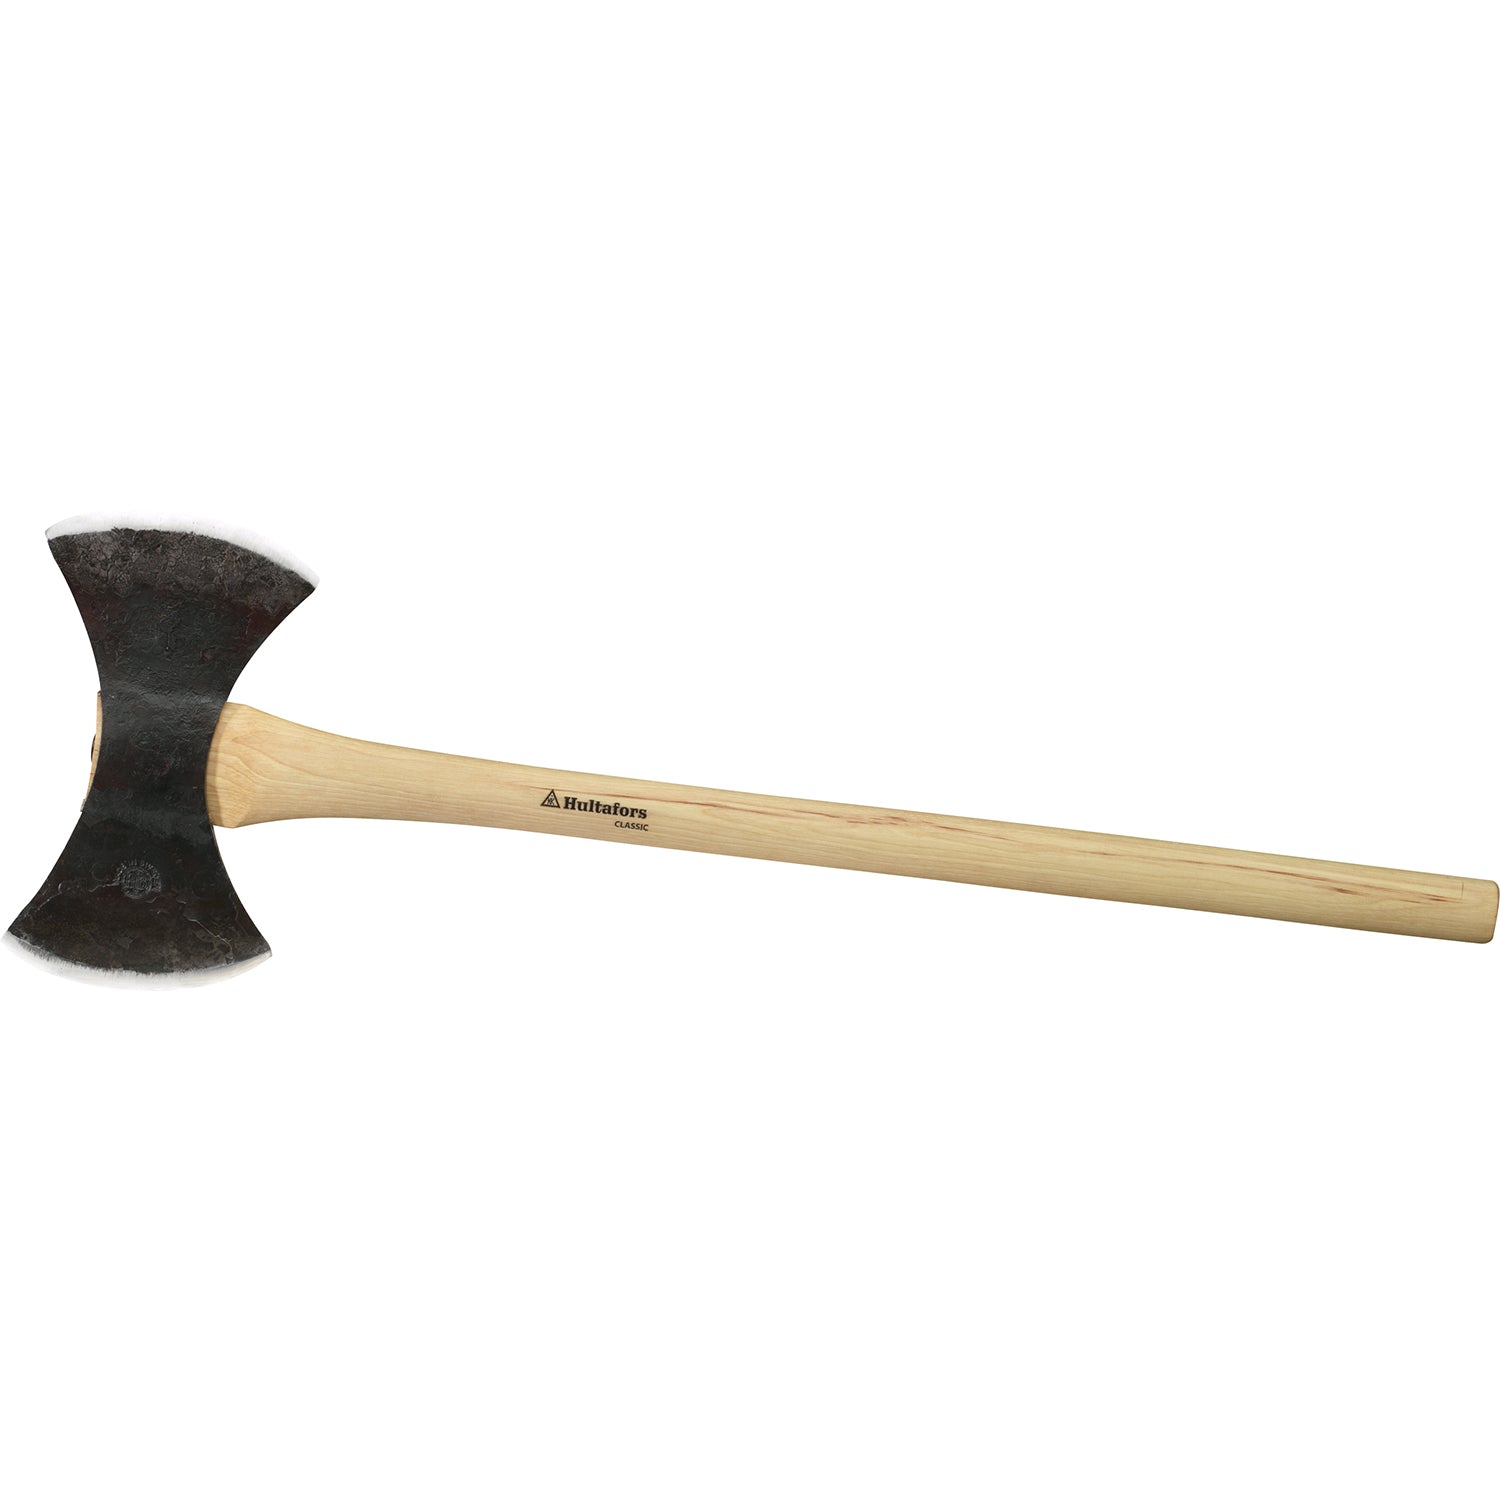 Classic Throwing Axe - 840750 - KBM Outdoors